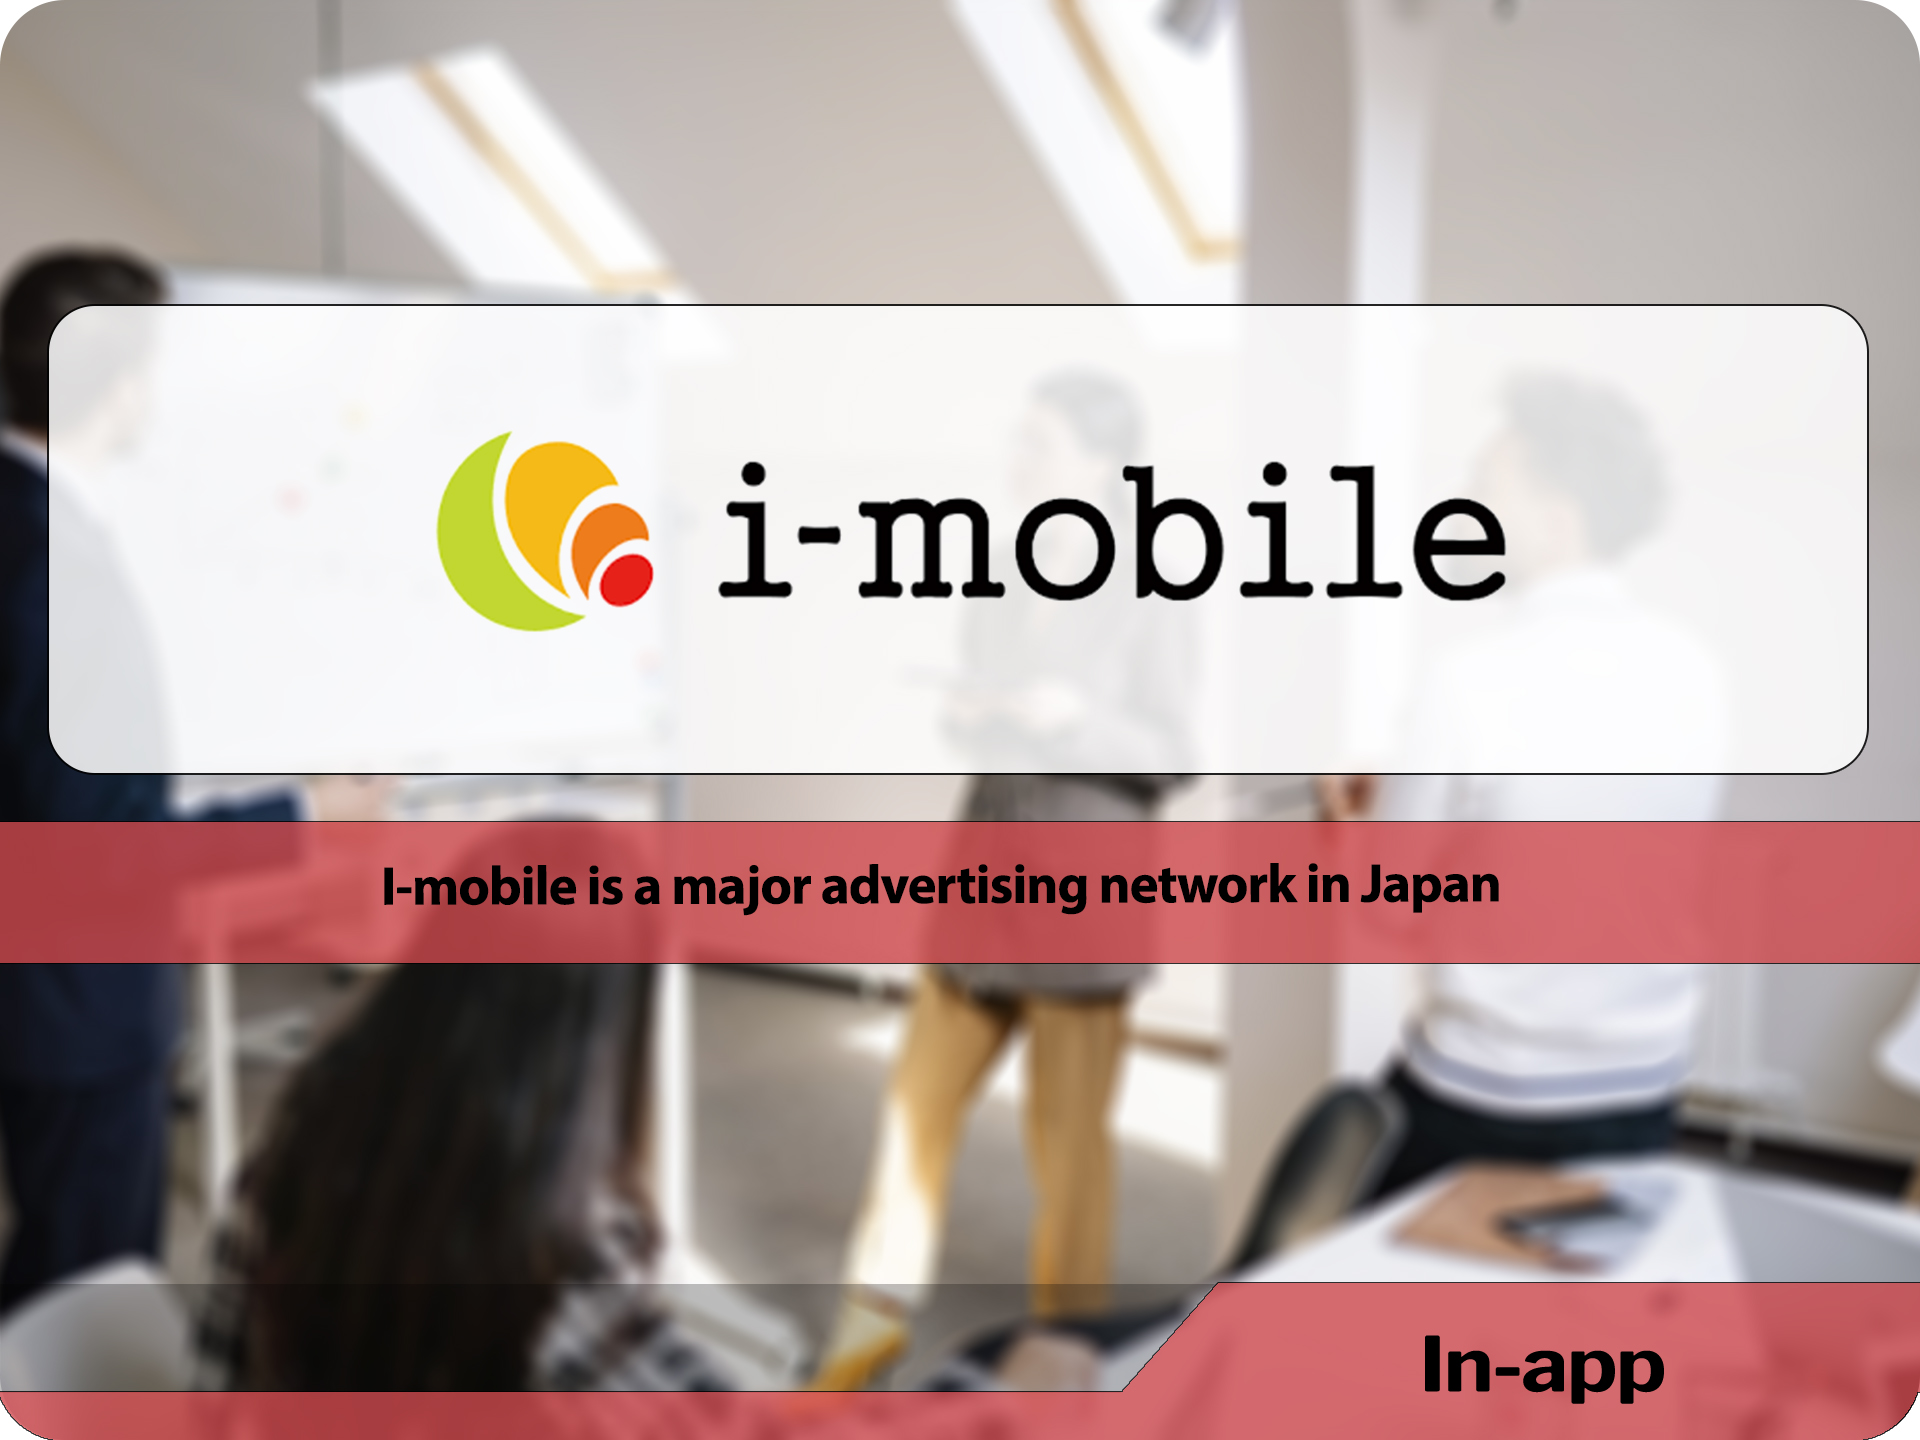 I-mobile is a major advertising network in Japan